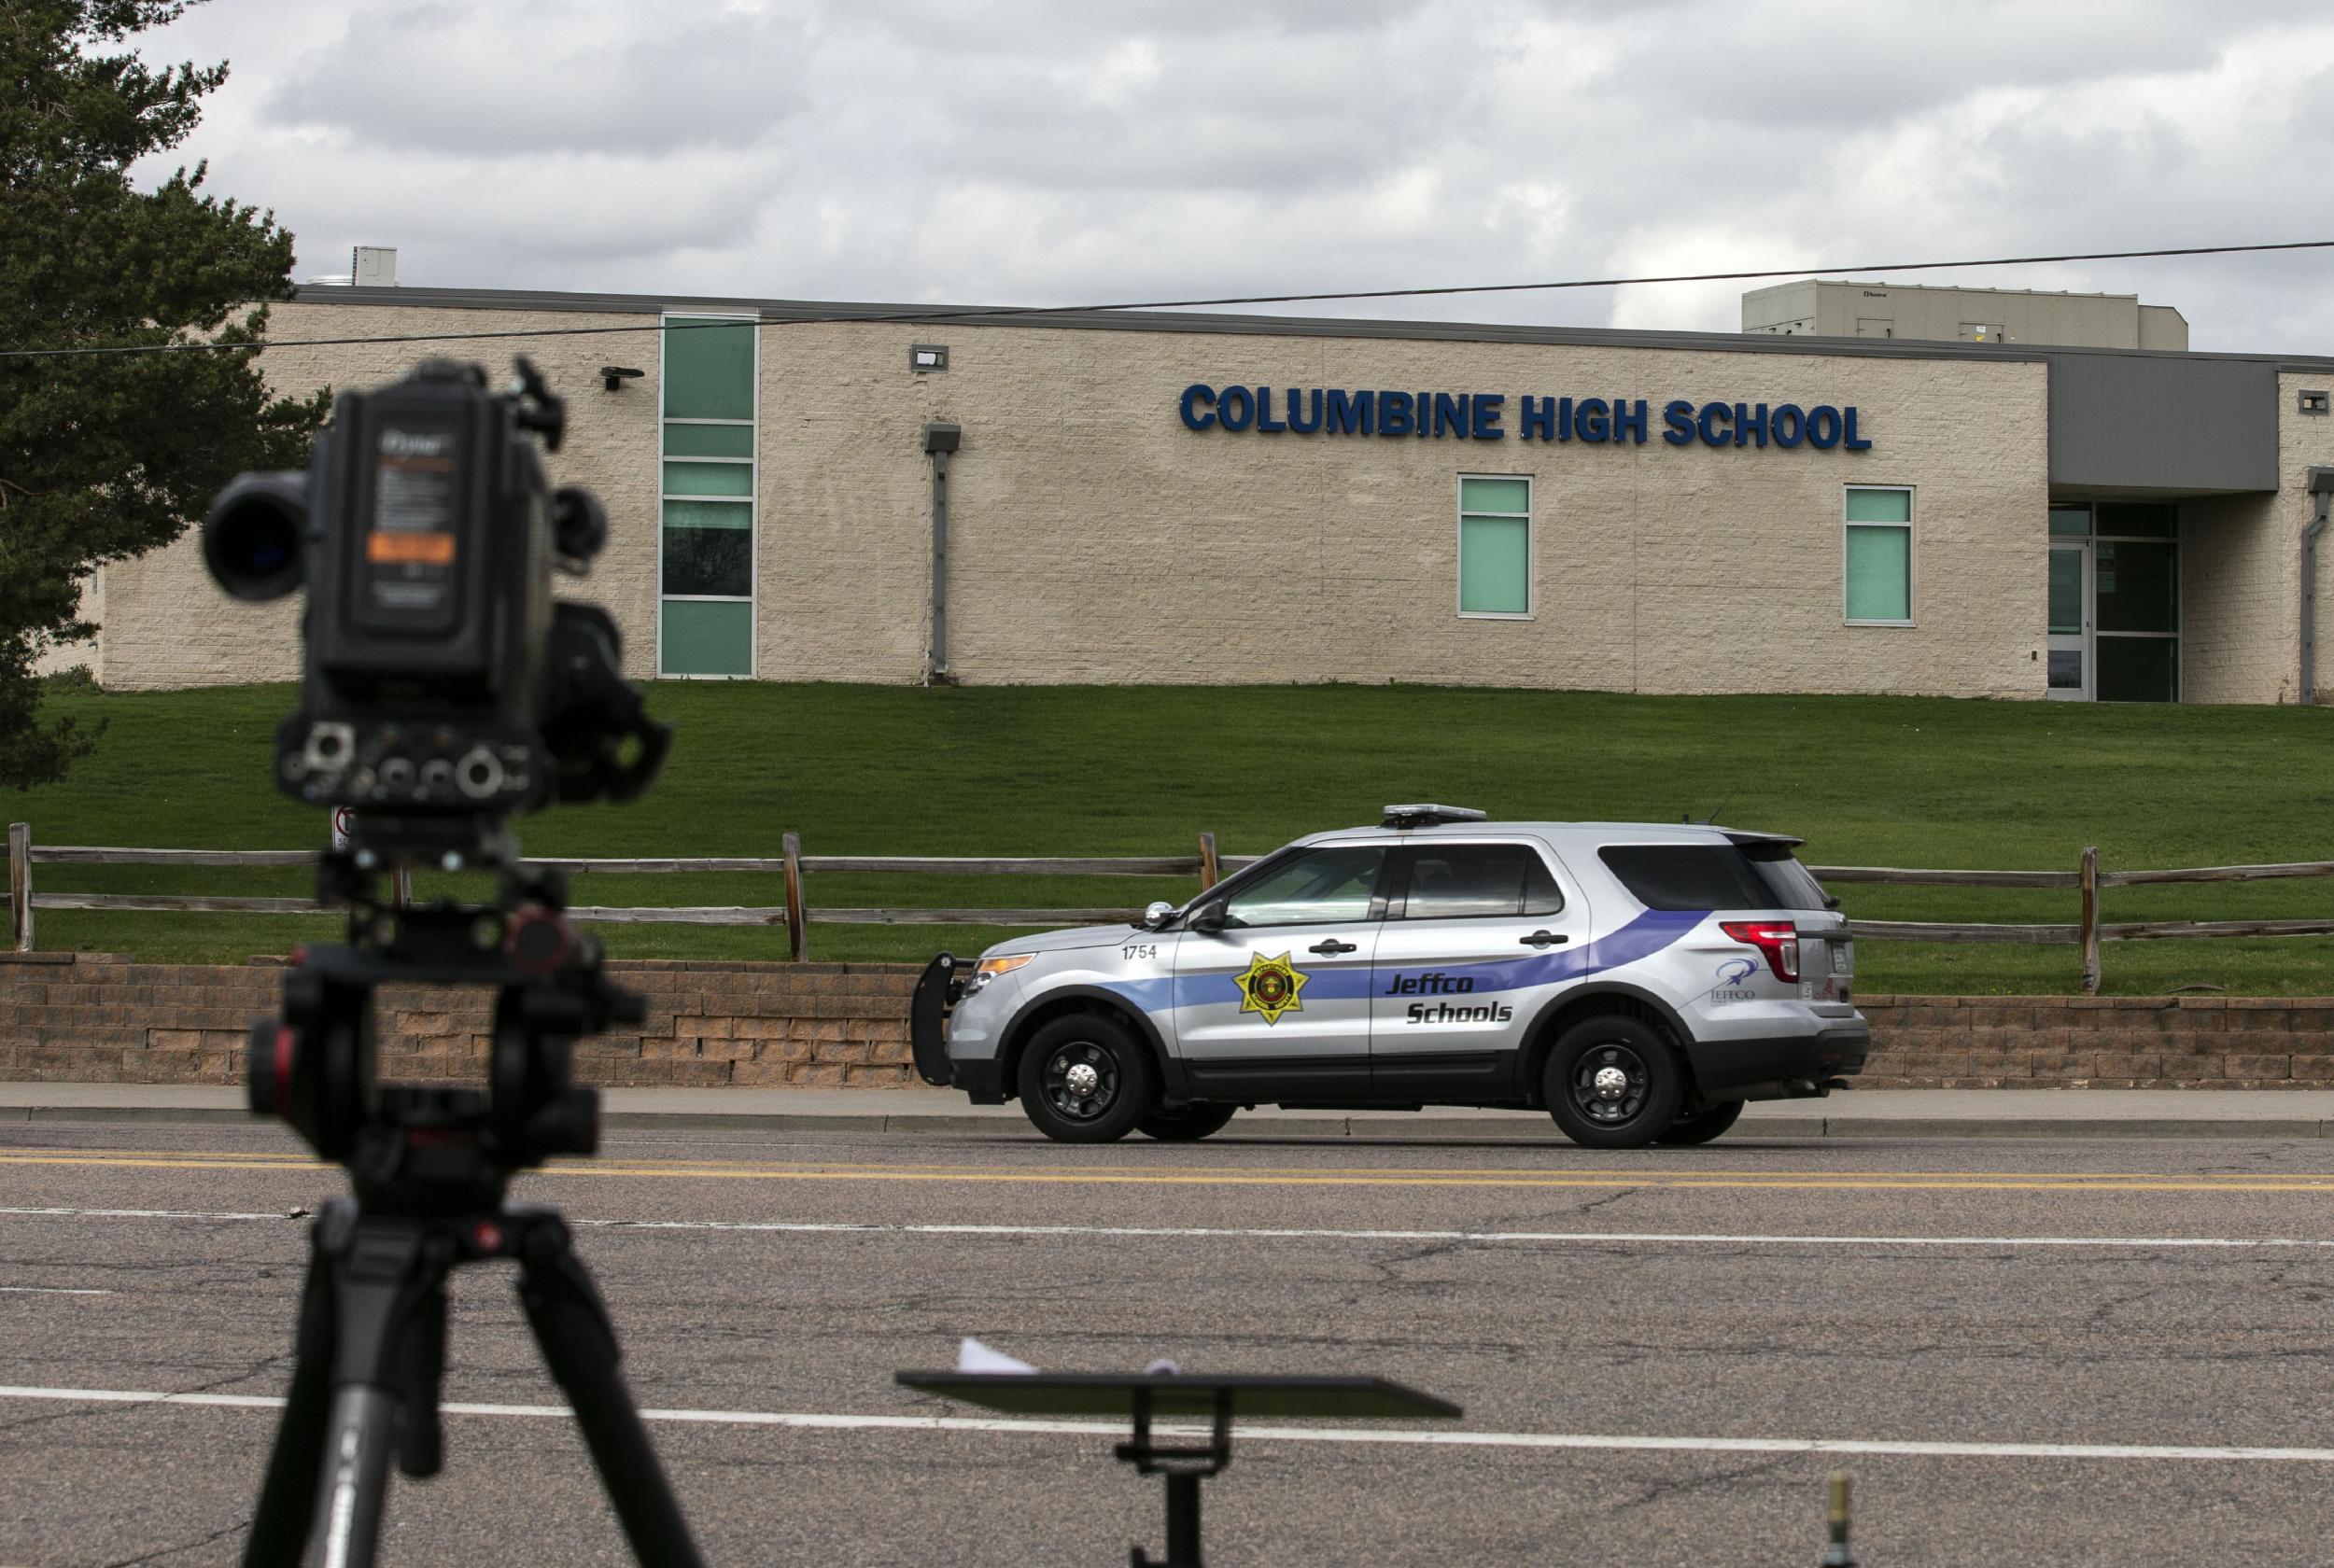 Since Columbine, there have been three school shootings with a higher death toll than the 13 in Littleton, Colorado